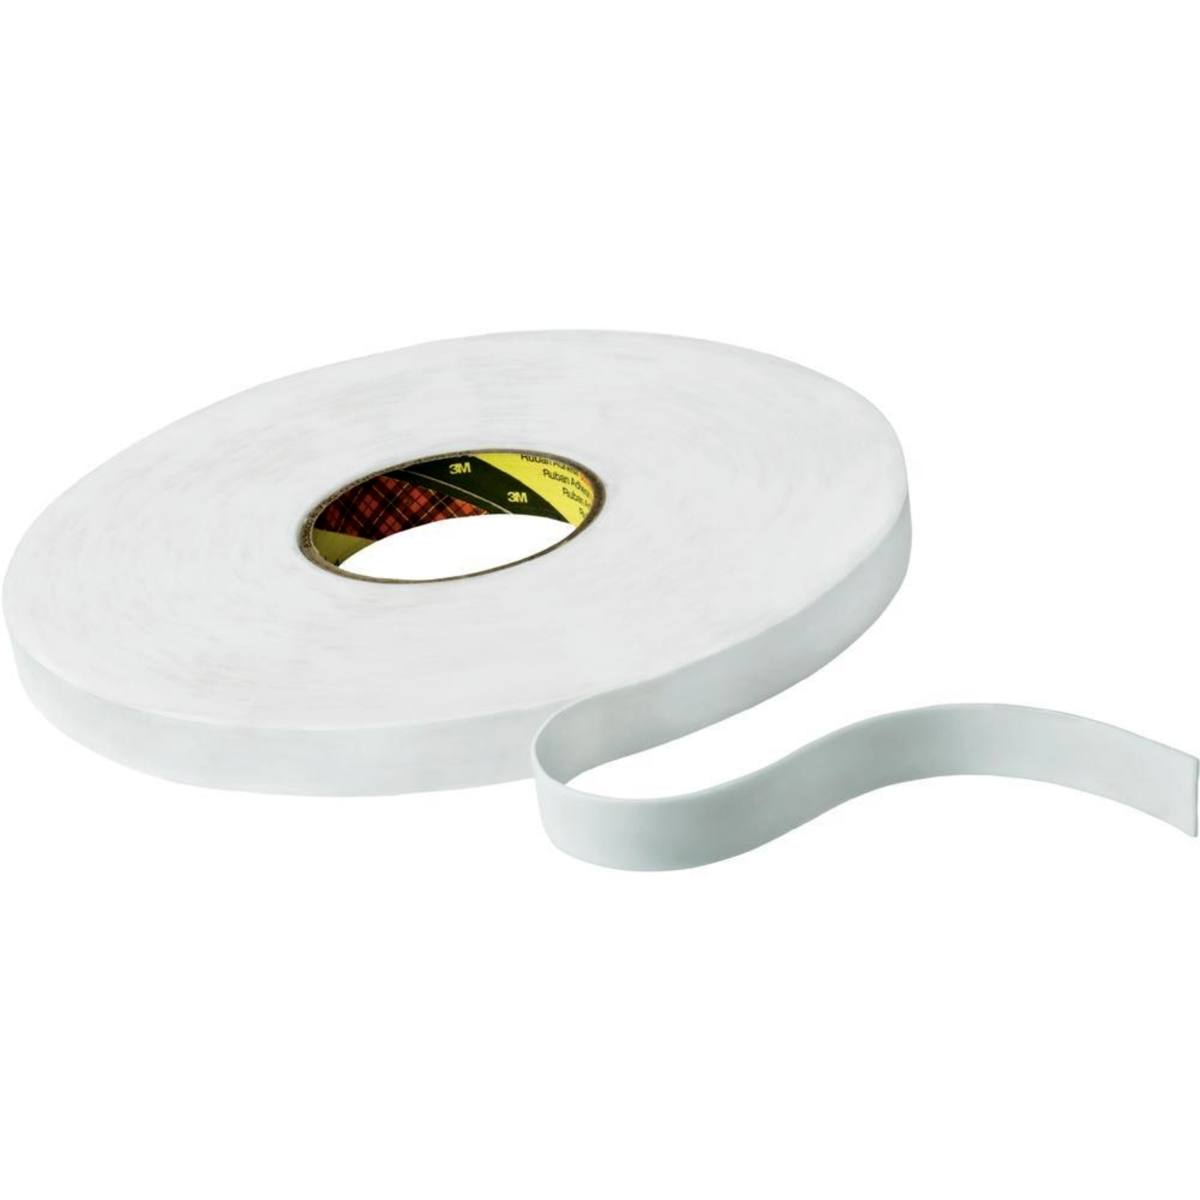 3M PE foam adhesive tape with rubber-resin adhesive 9528, white, 9 mm x 66 m, 0.8 mm